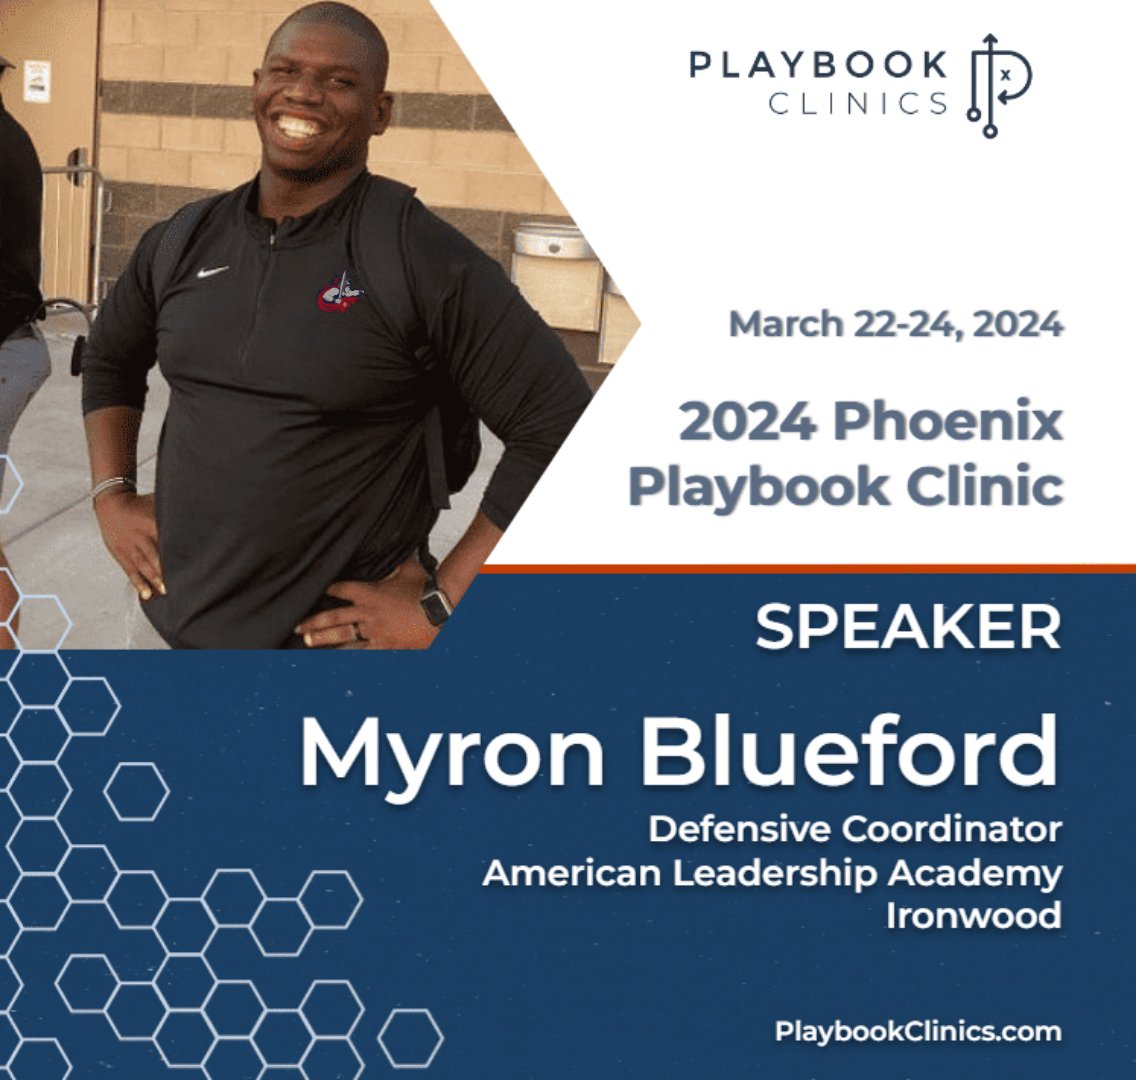 Looking forward to speaking and networking with great AZHS coaches at this weekend's @PlaybookClinics ! If you’re not registered yet, be sure to use 'BLUEFORD' at checkout for a discount. playbookclinics.com/clinic/phoenix…